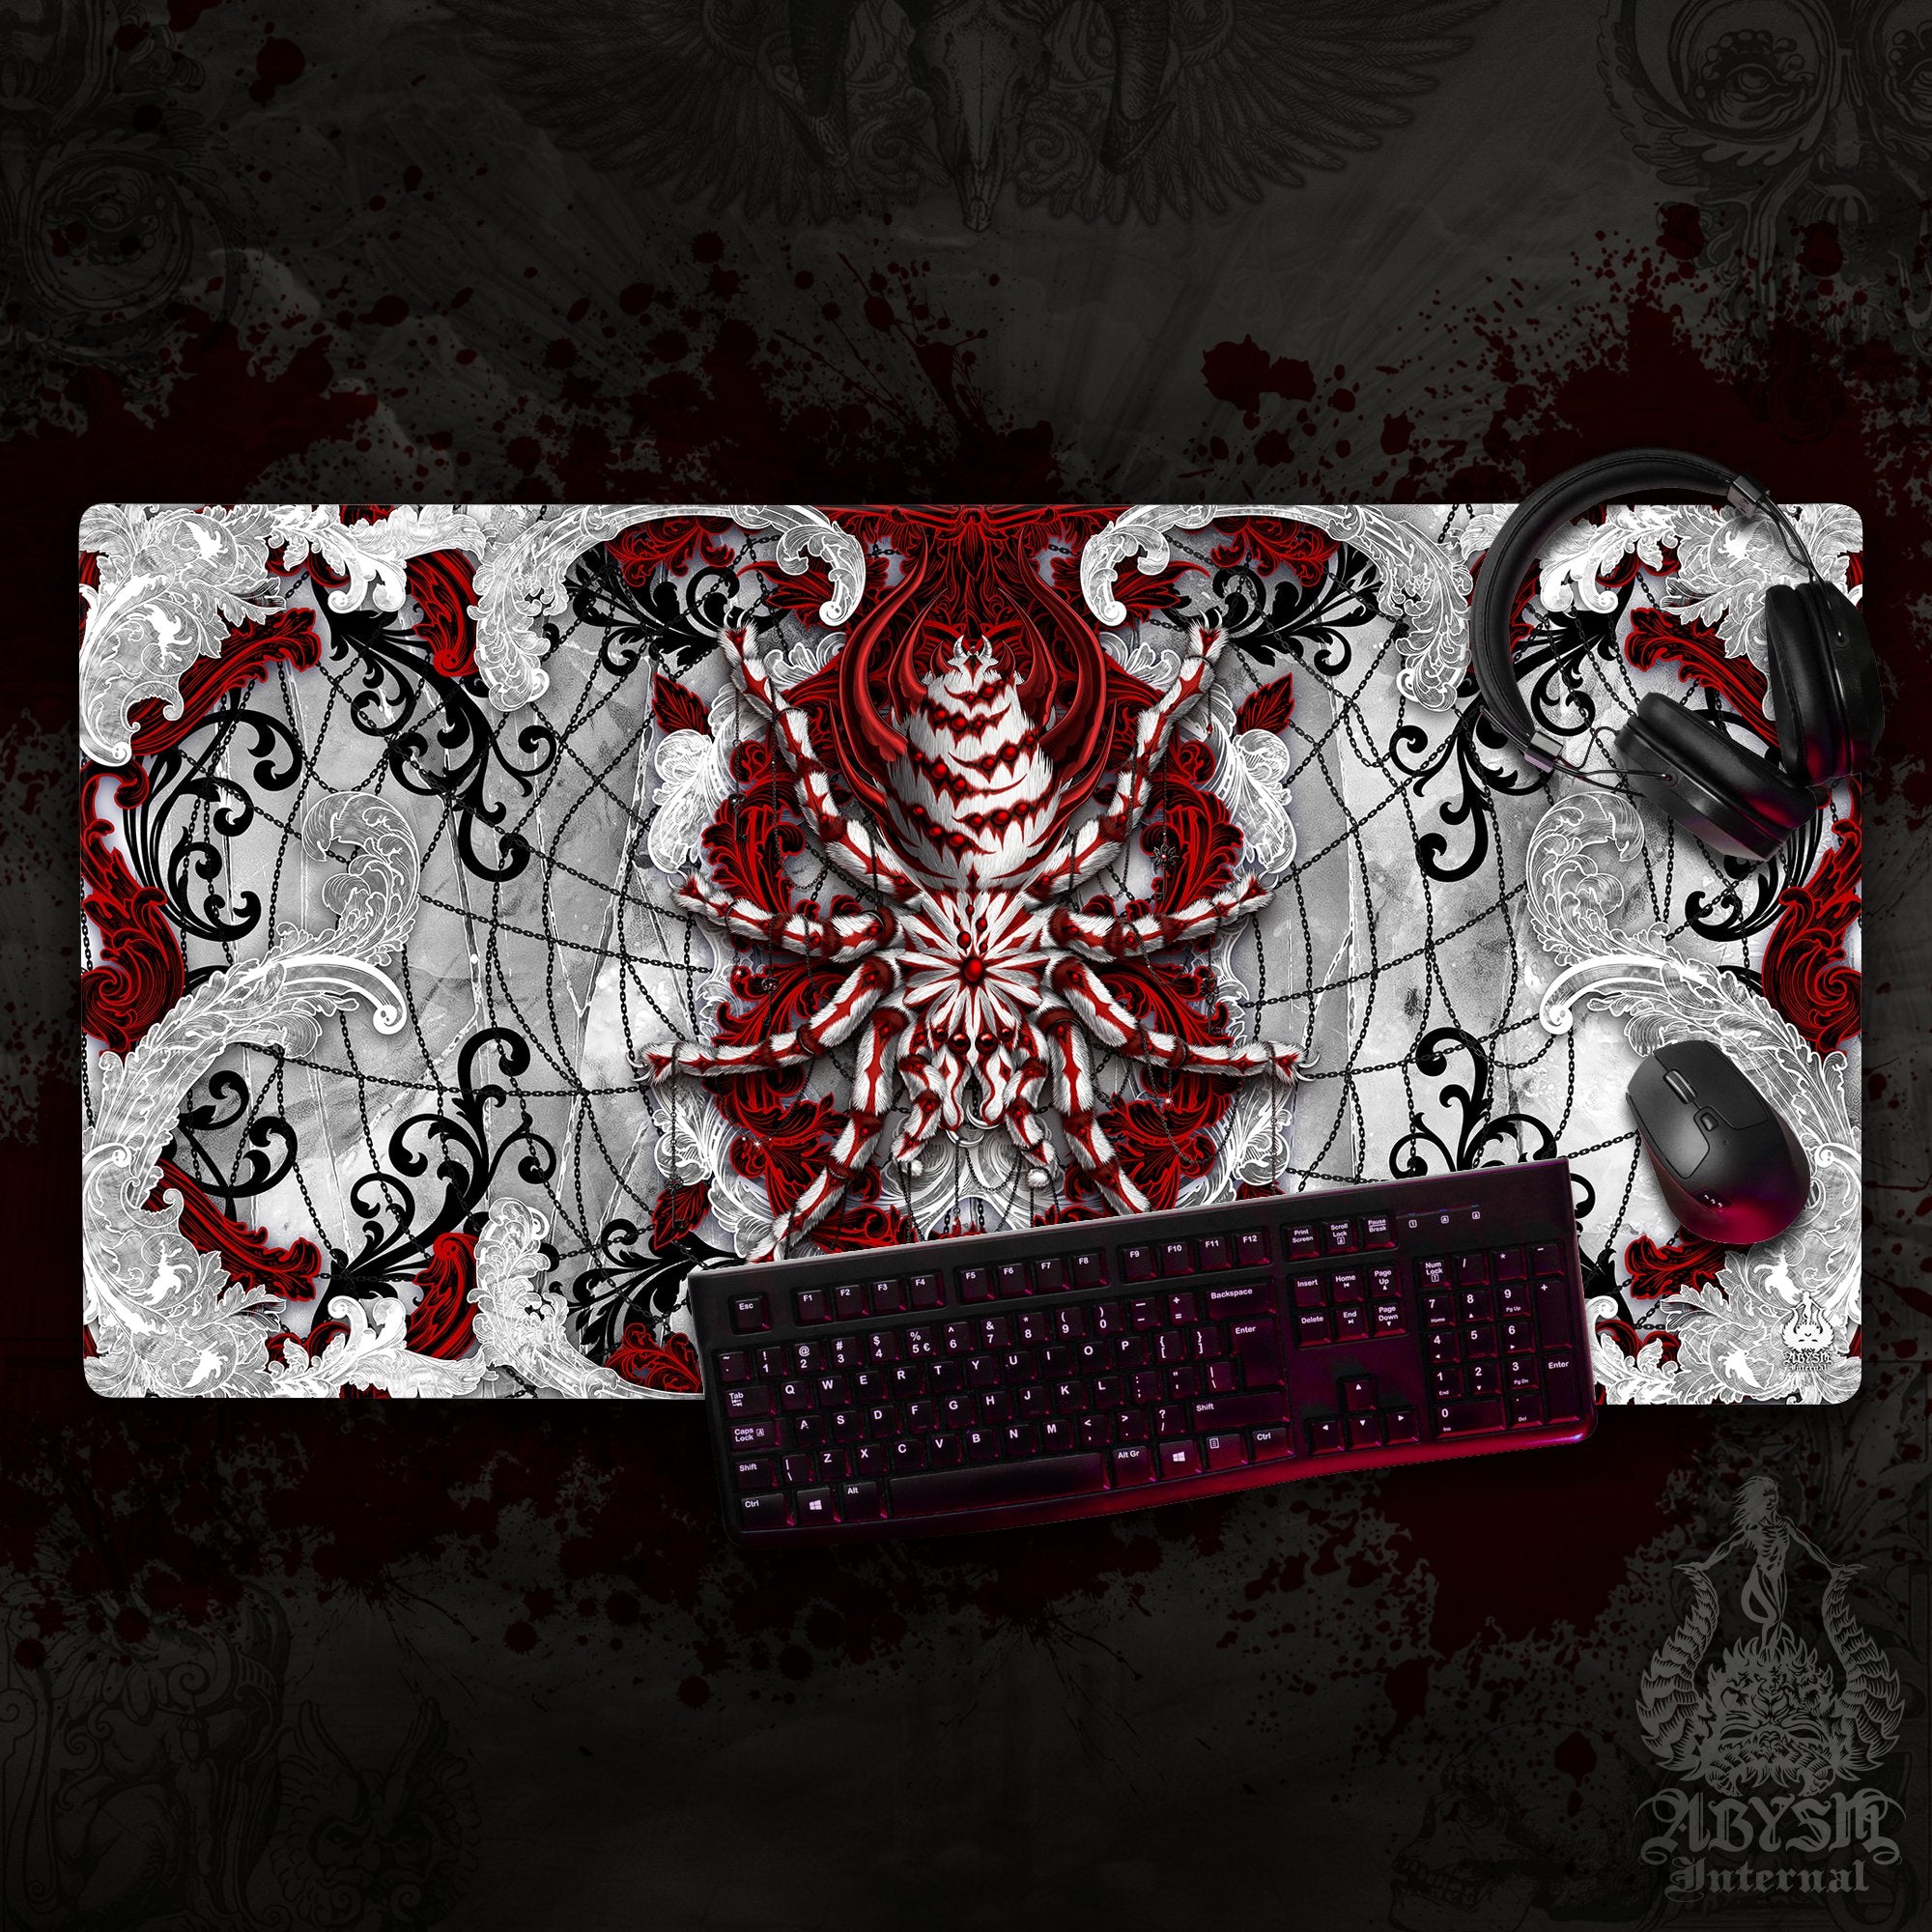 Goth Gaming Desk Mat, Spider Mouse Pad, Gamer Table Protector Cover, Halloween Workpad, Bloody White Tarantula Art Print - Abysm Internal